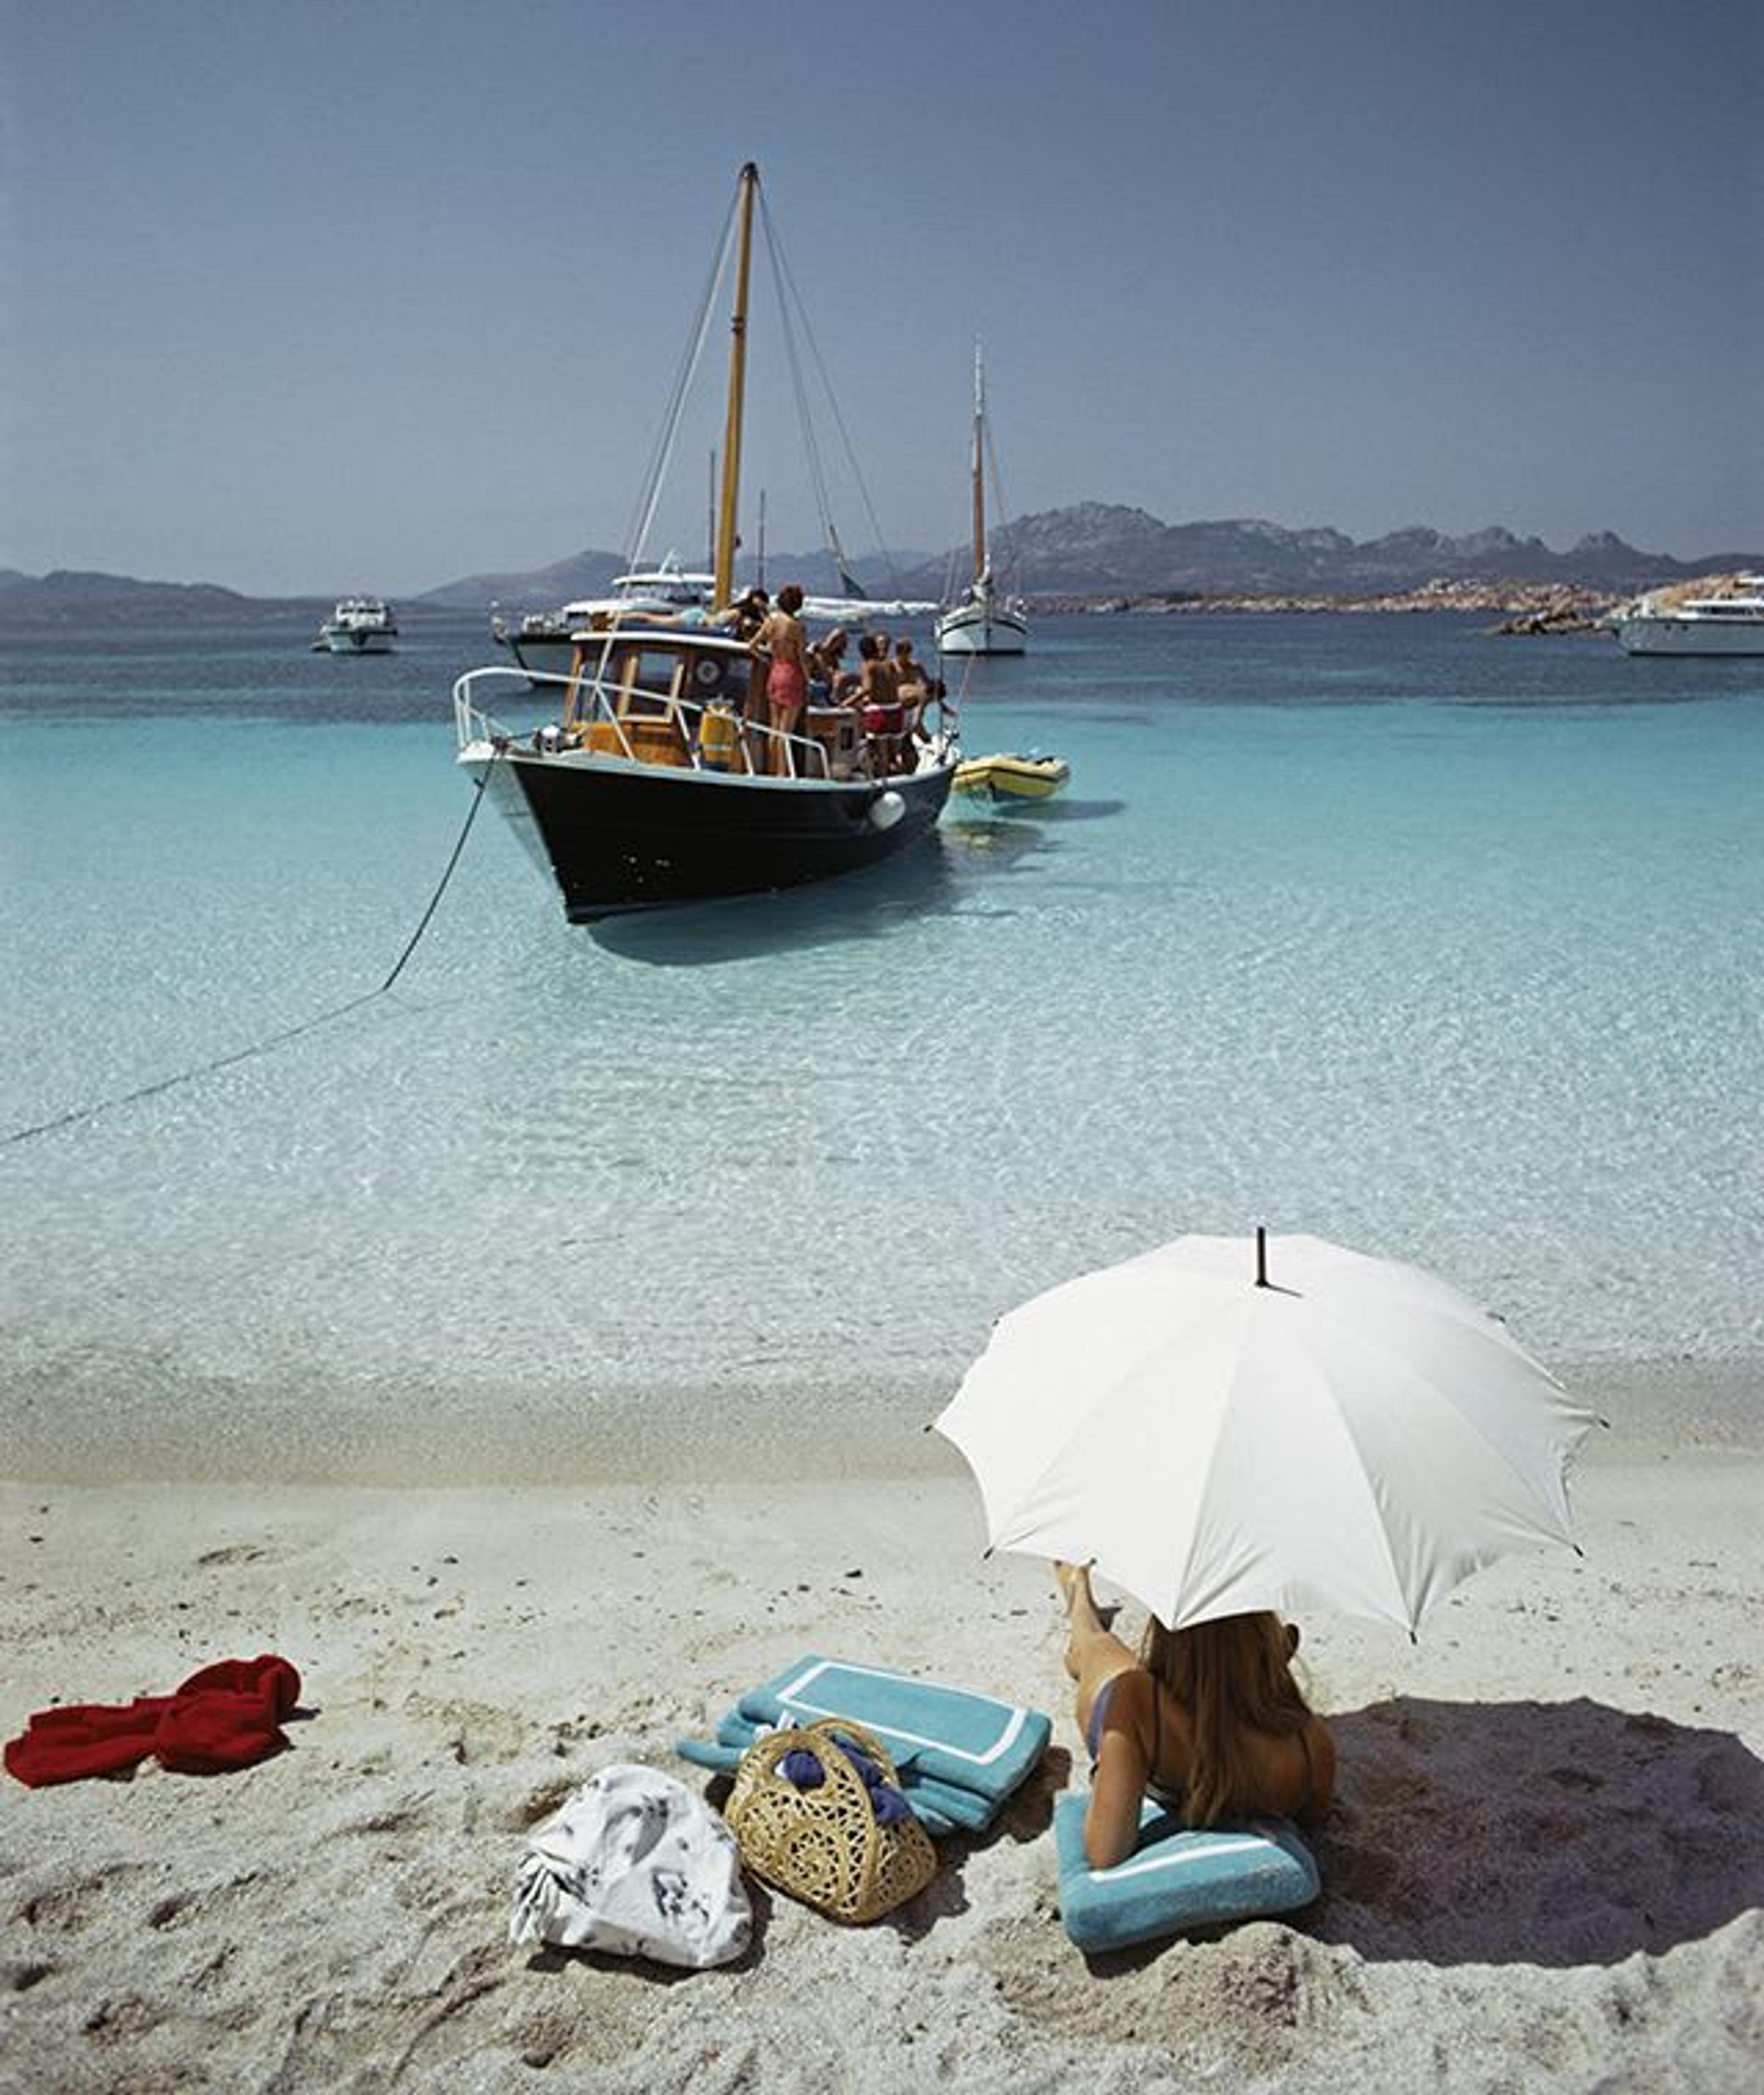 Photograph By Slim Aarons, Getty Images